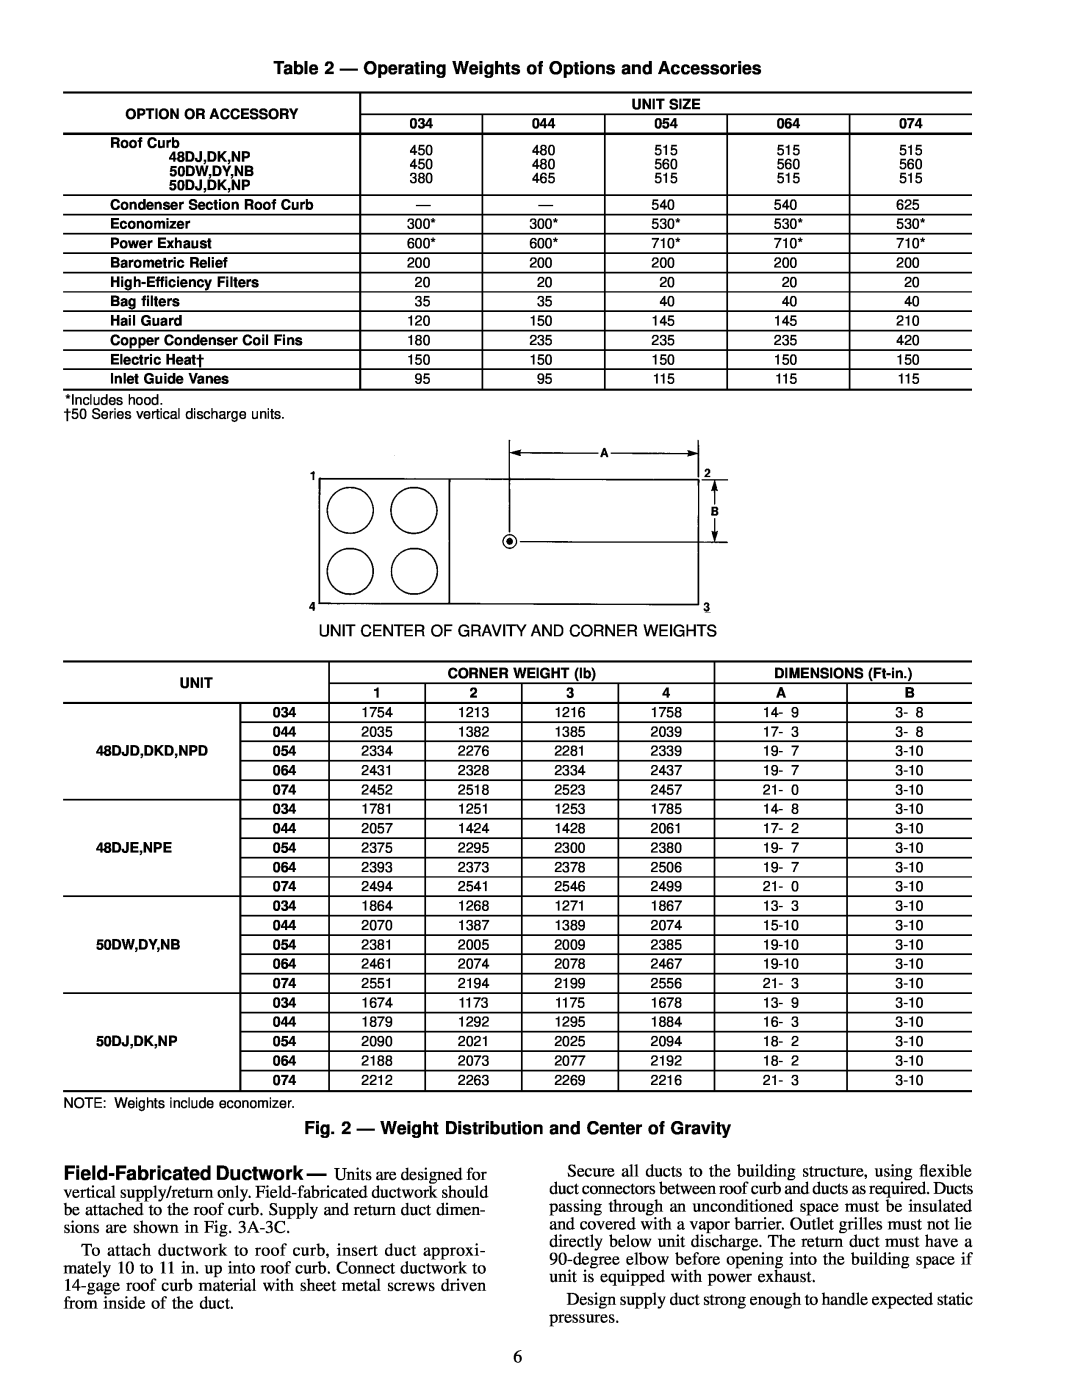 Carrier NP034-074 specifications 